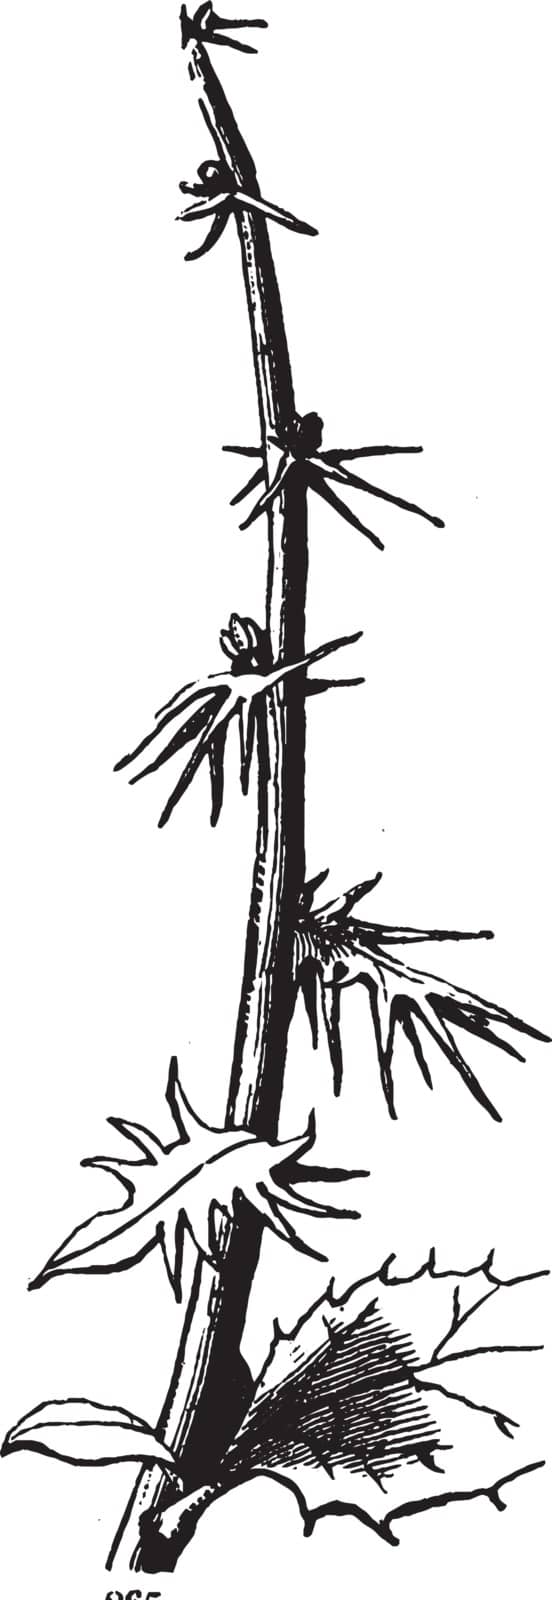 A picture shows Shoot Plant. It consists of stems including their appendages, the leaves & lateral buds, flowering stems & flower buds. The new growth from seed germination that grows upward is shooting, vintage line drawing or engraving illustration.